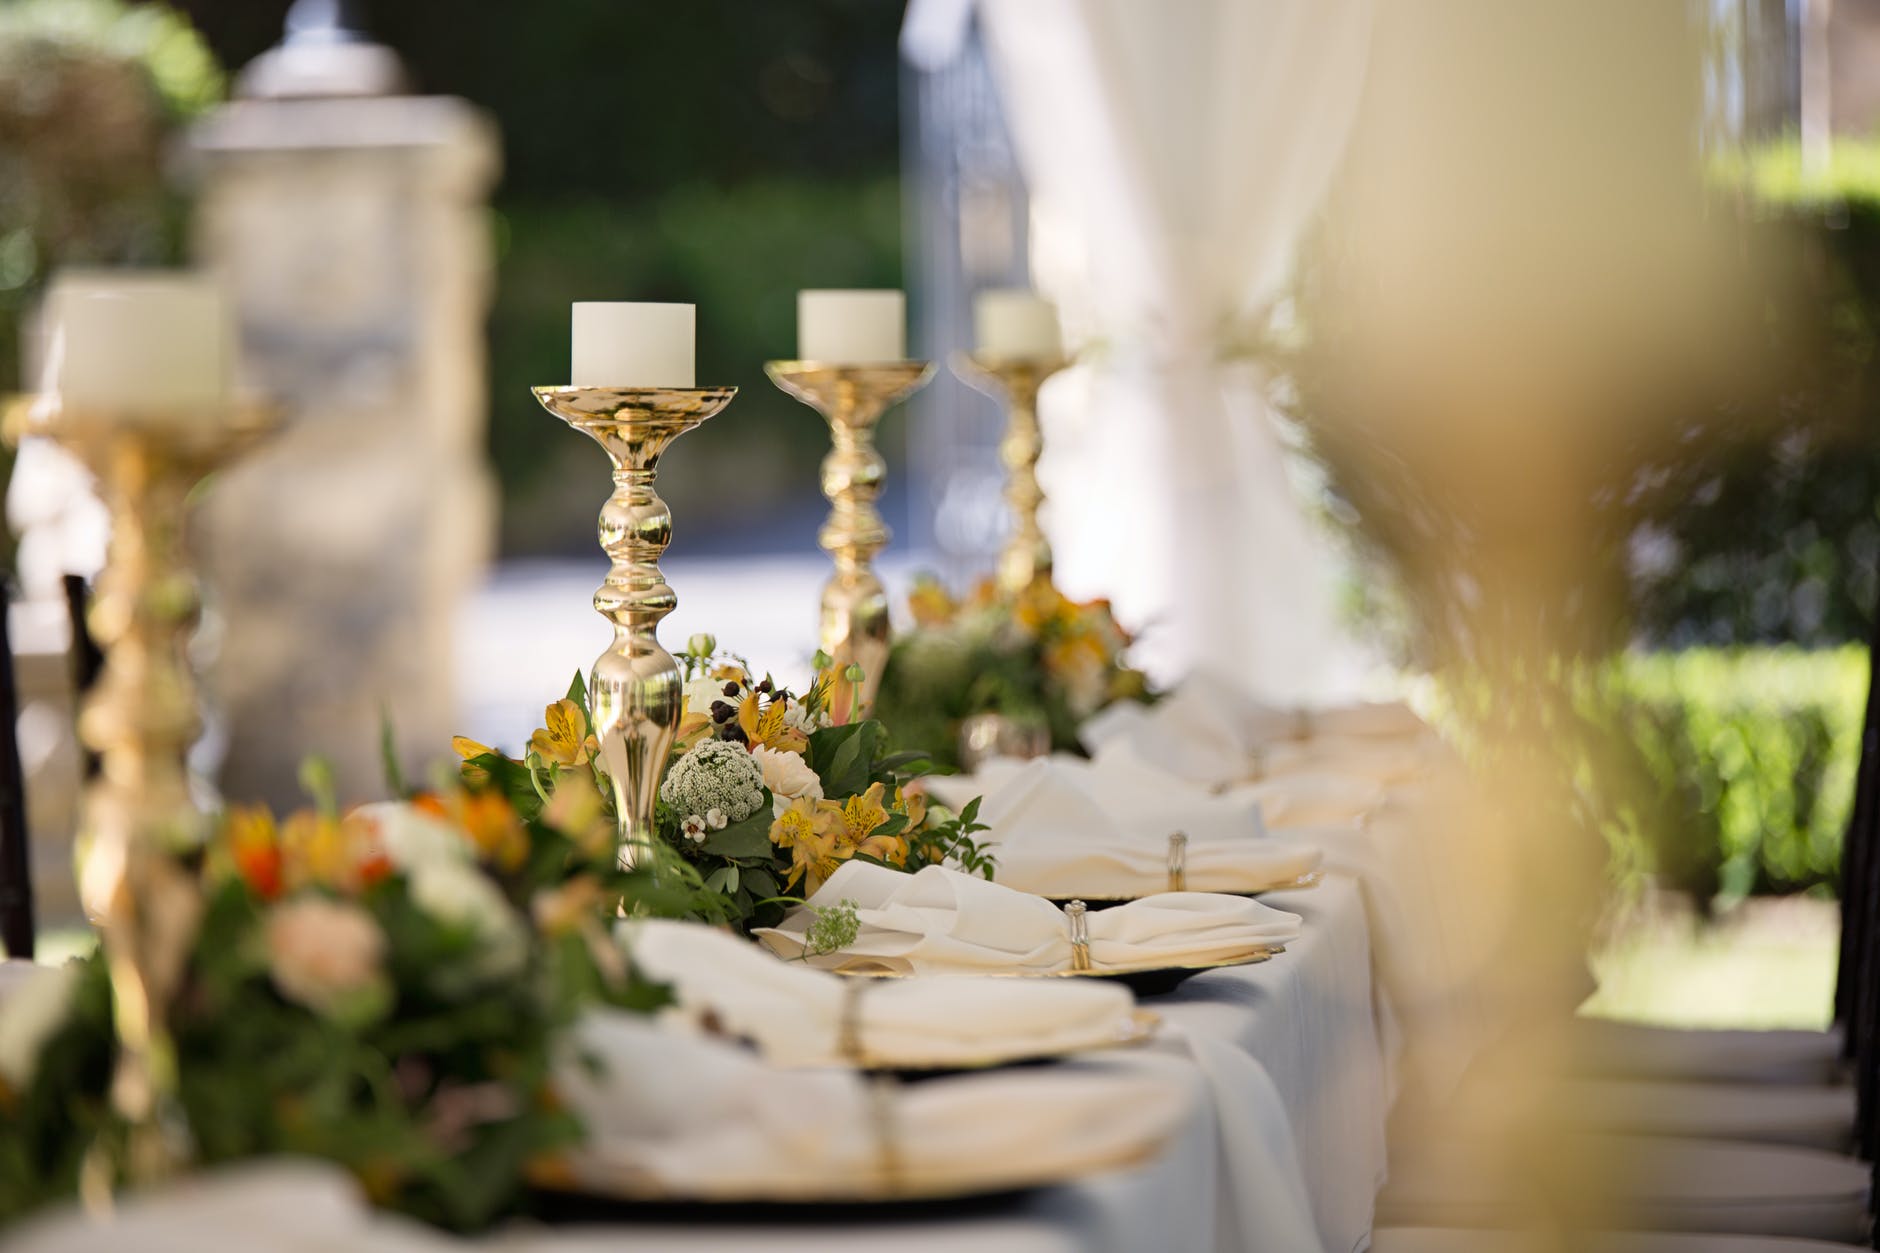 long table with flowers, linens and plates in outdoor wedding